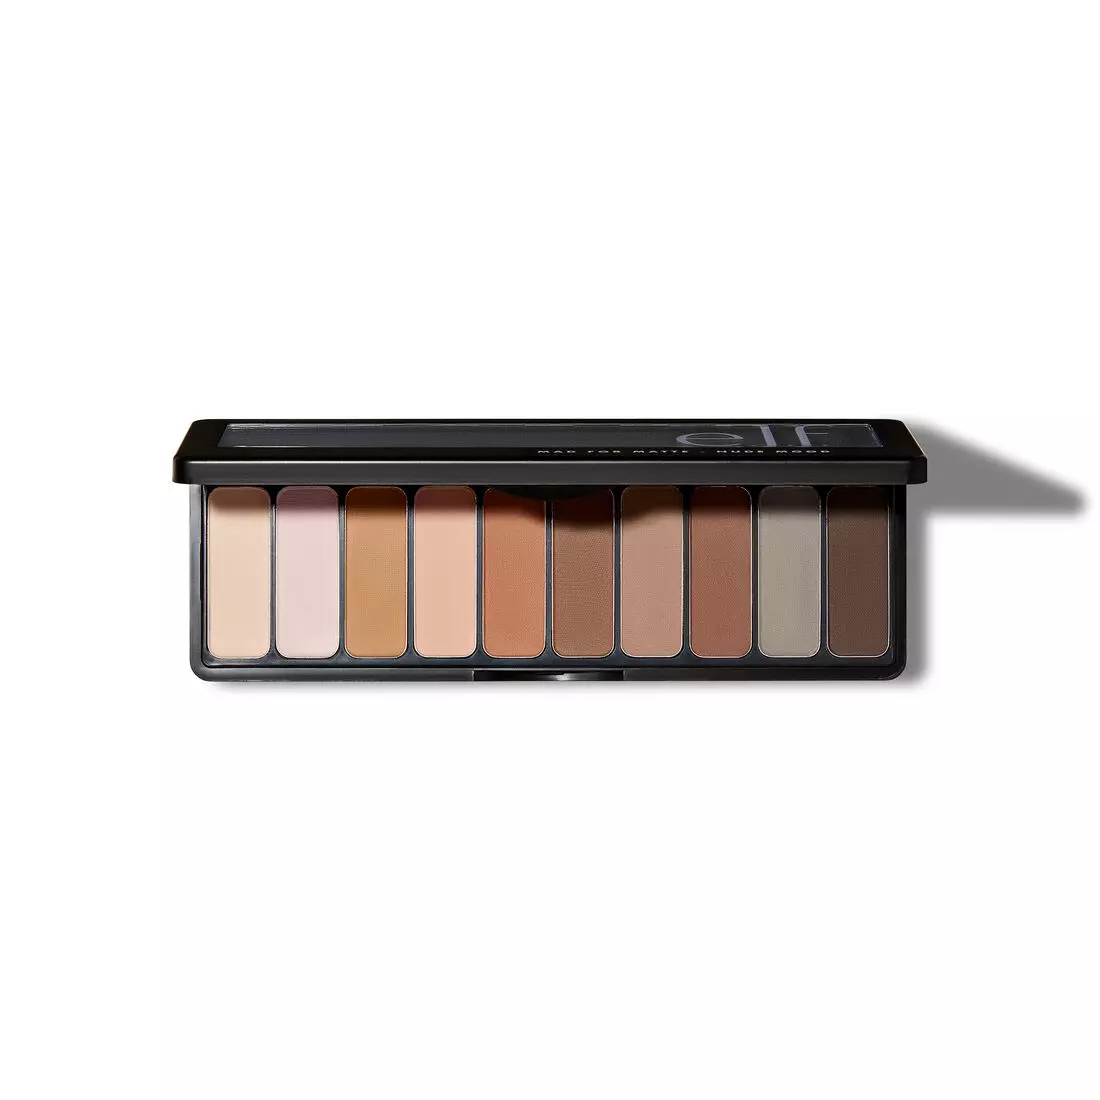 e.l.f Mad For Matte Eyeshadow Palette